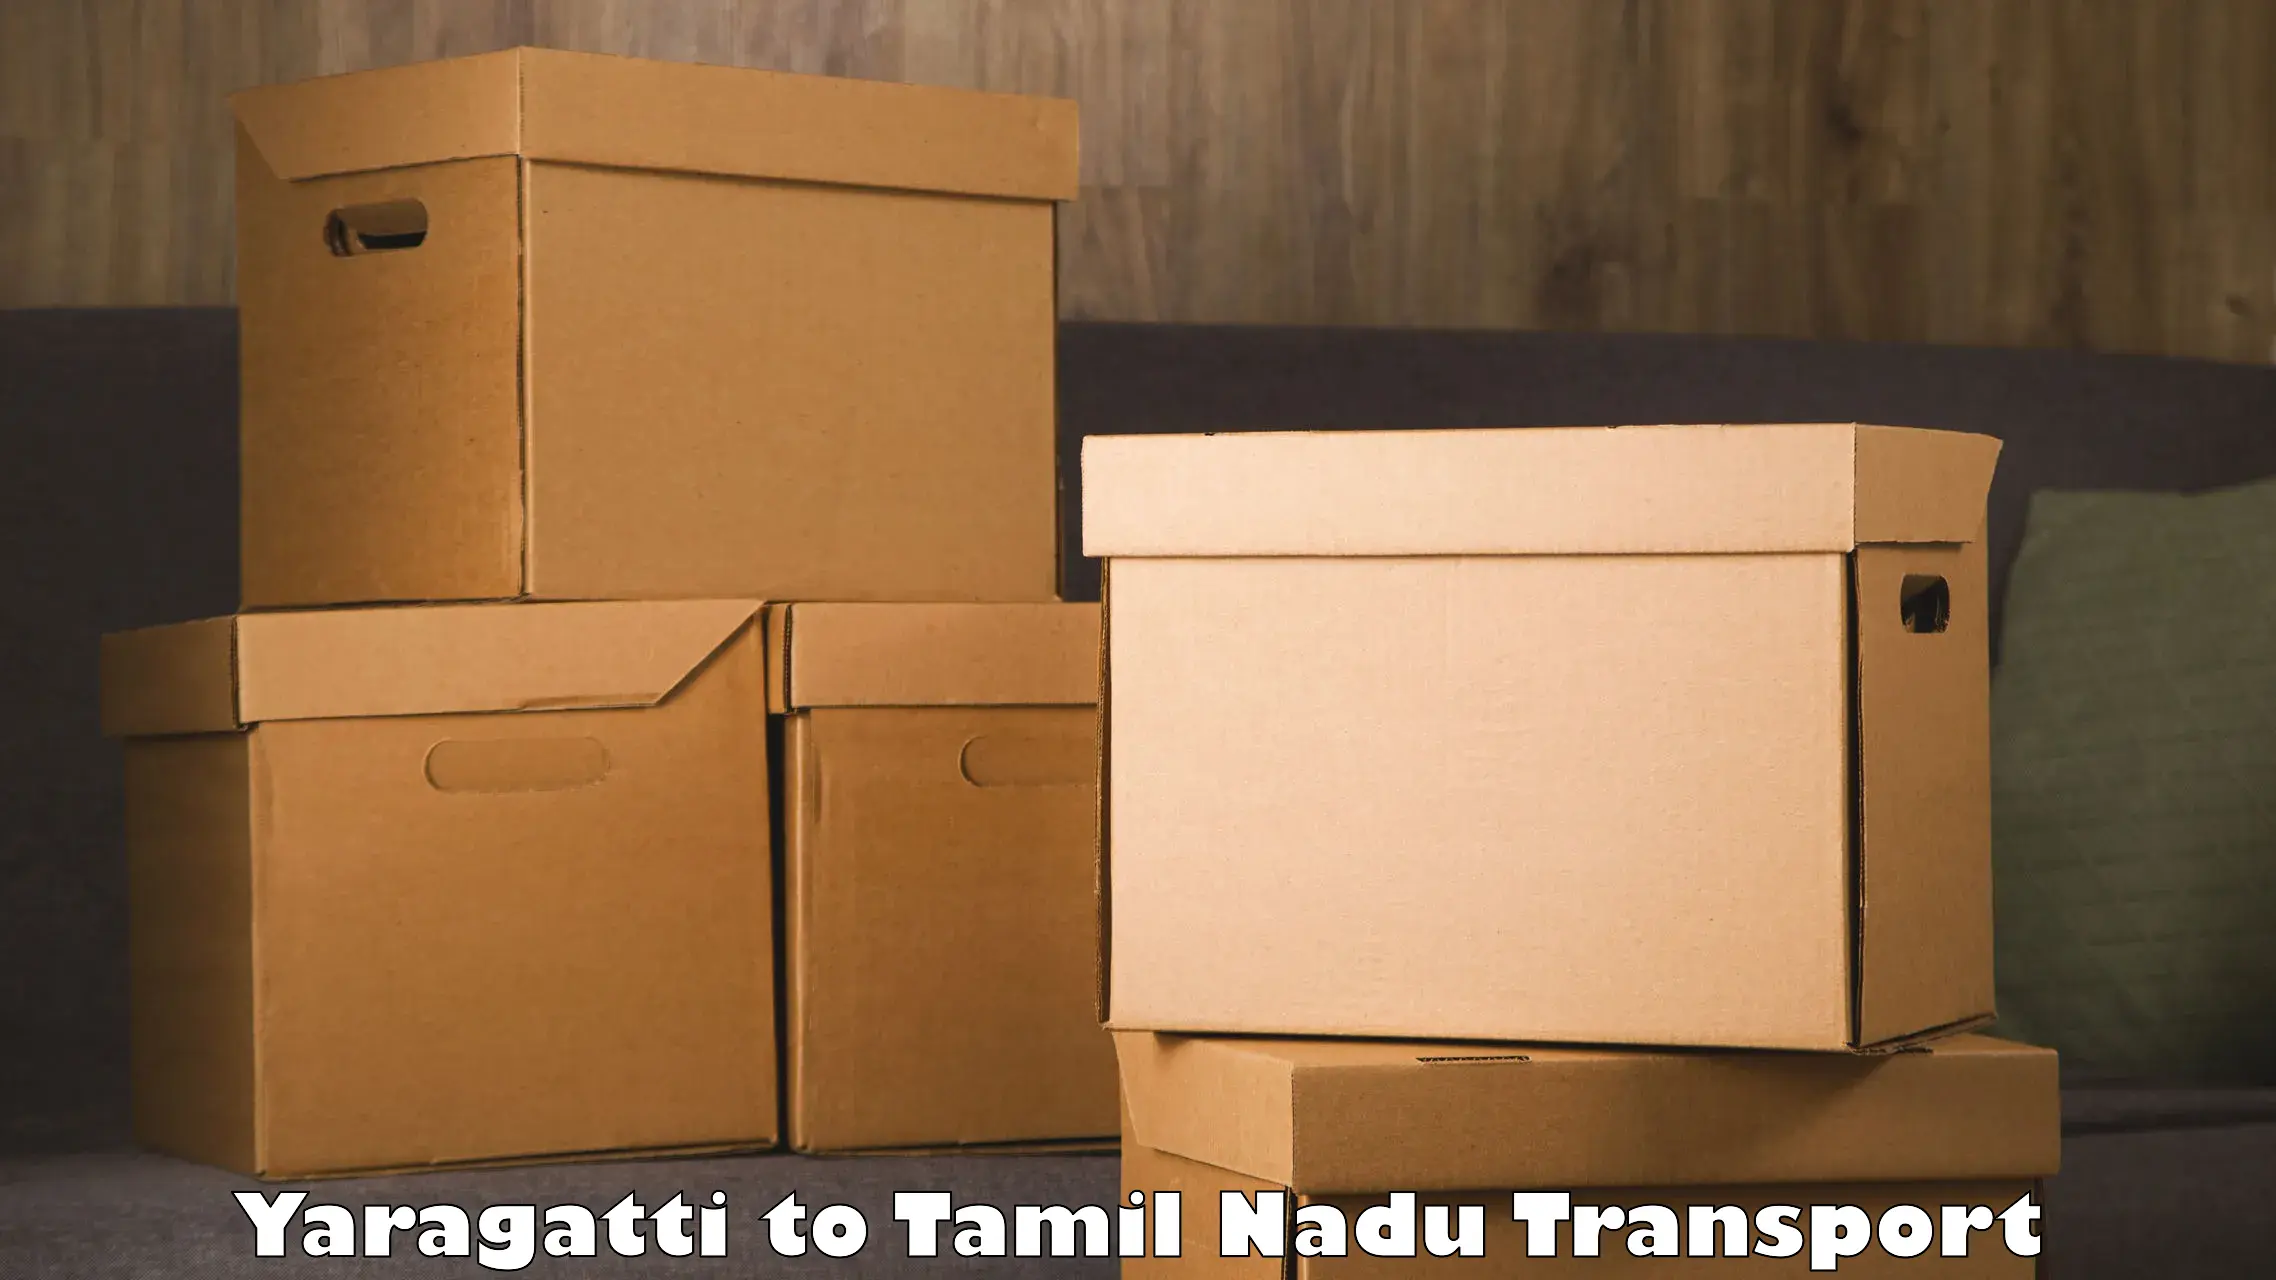 Daily transport service Yaragatti to Vellore Institute of Technology